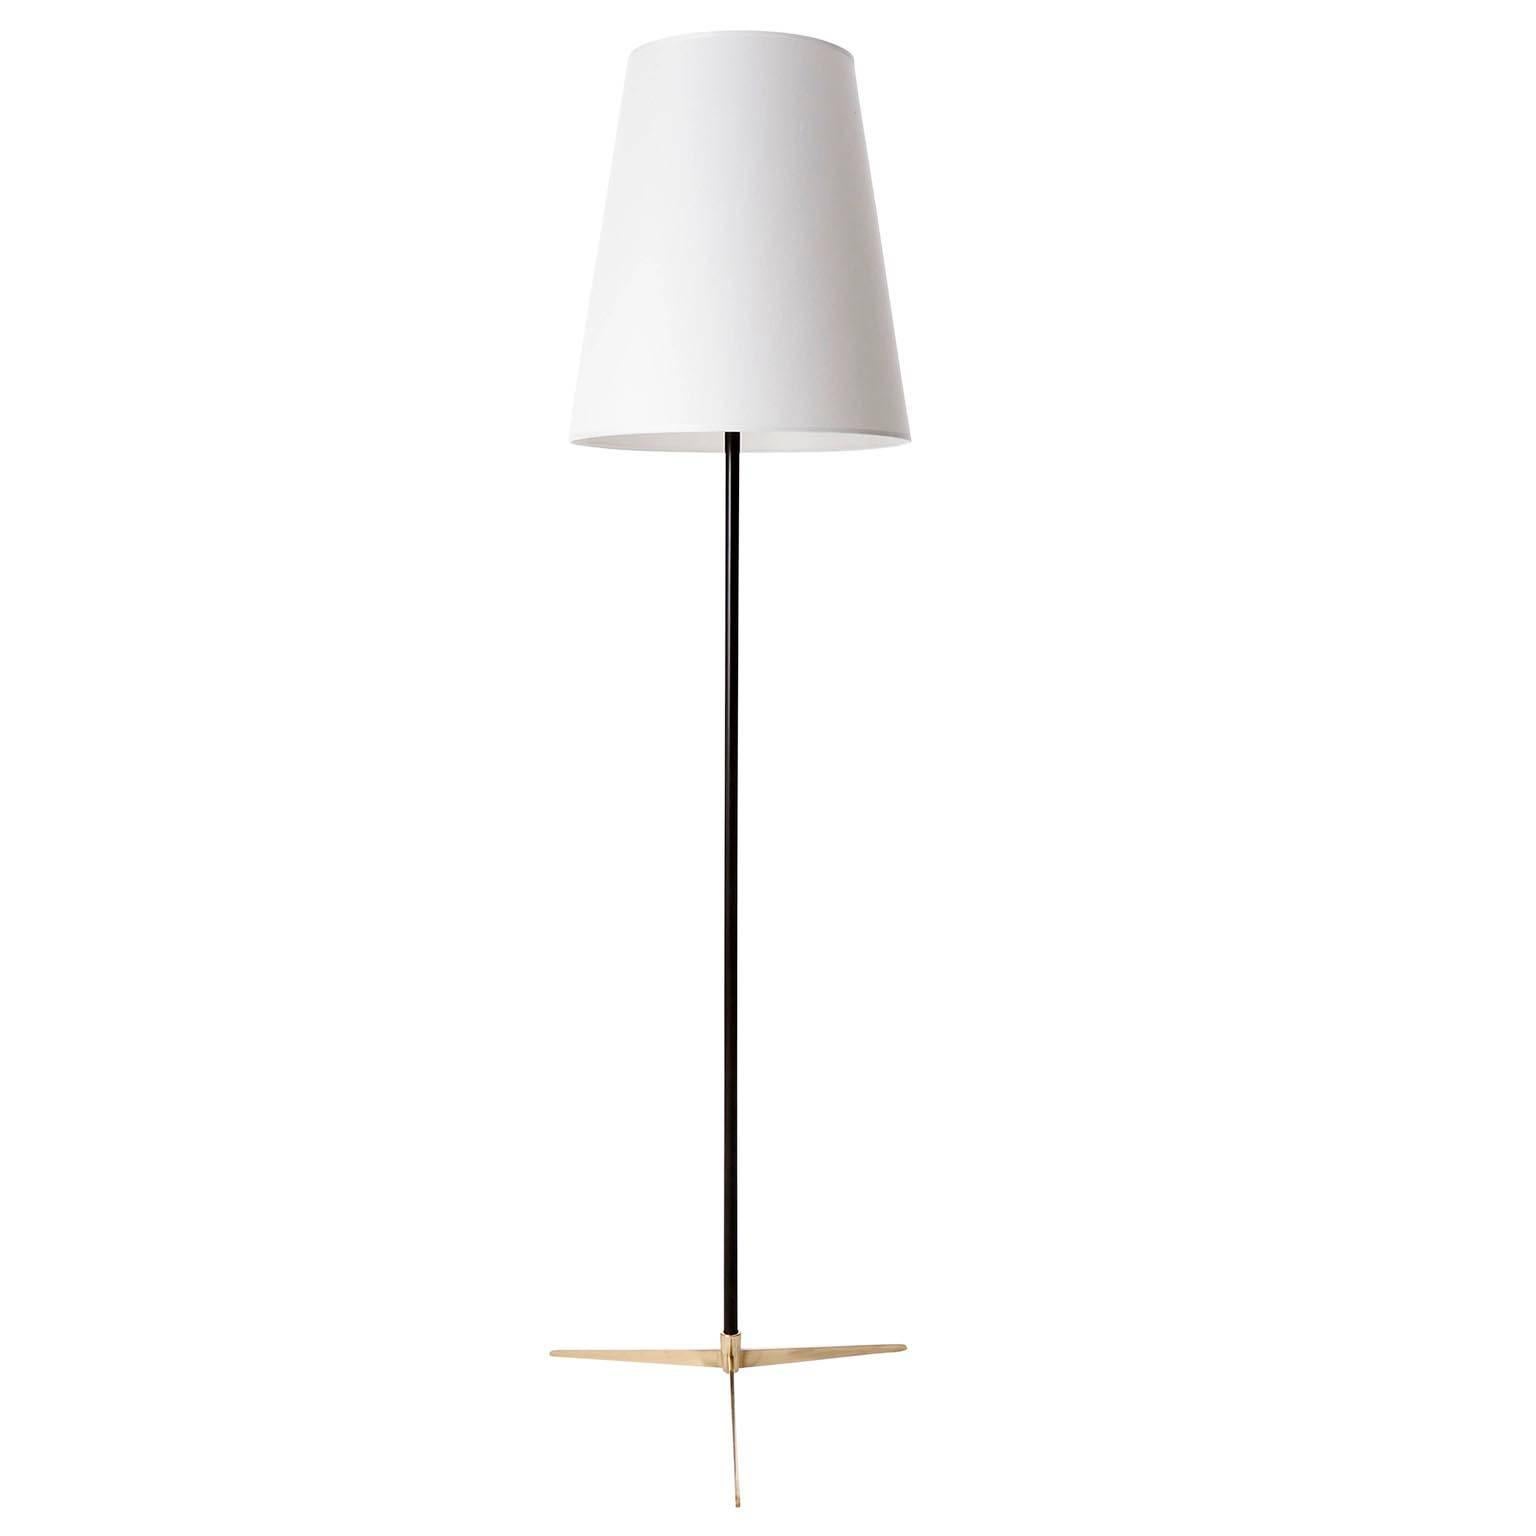 Two floor lights model 'Micheline' (model no. 2092) by J.T. Kalmar, manufactured in midcentury, circa 1960 (late 1950s and early 1960s).
They are made of a nice mixture of colors and materials: a polished tripod brass base, a blackened metal stand,